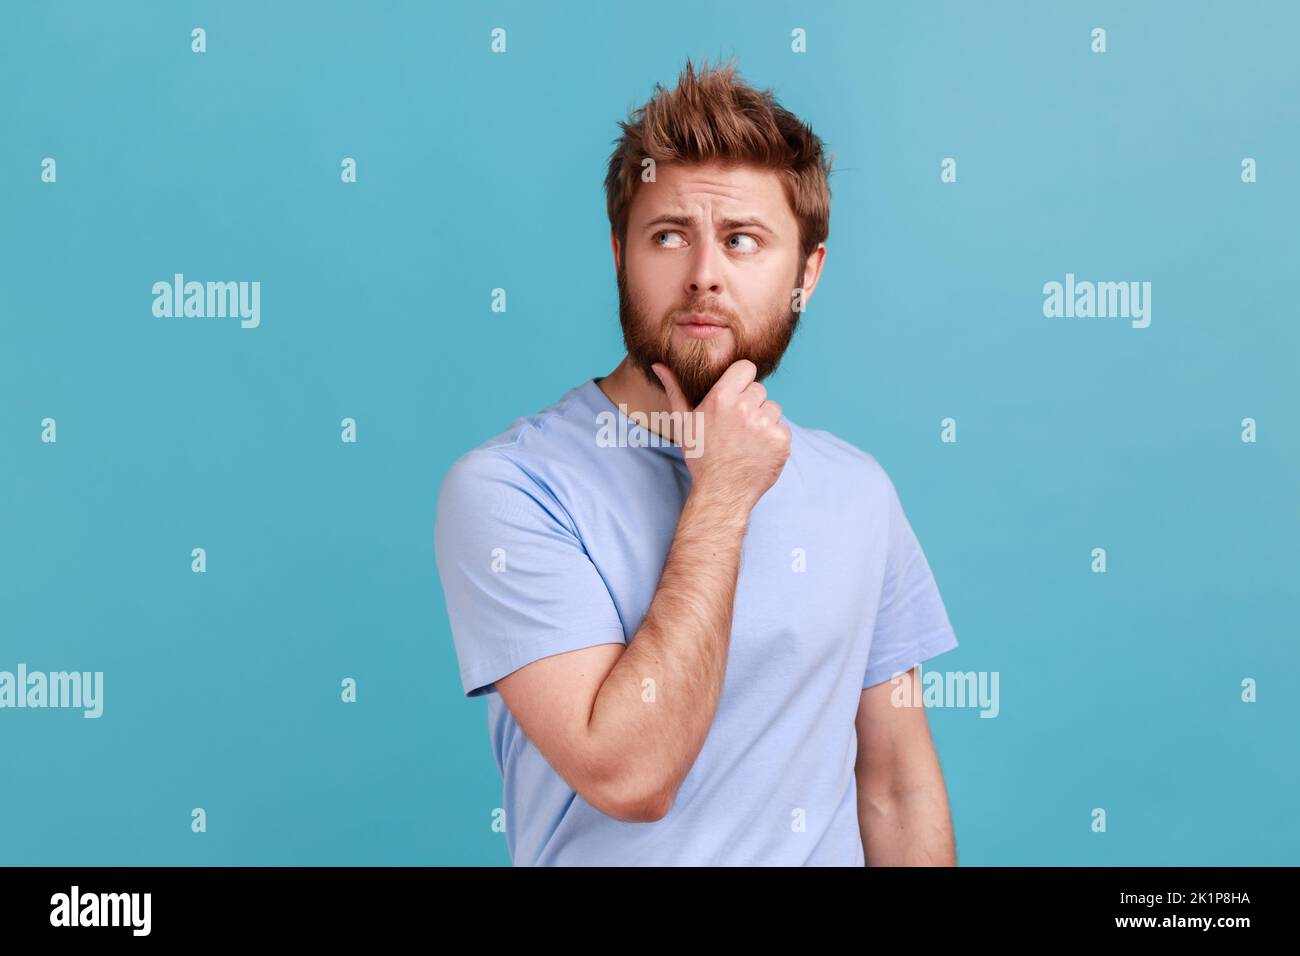 Portrait of unhappy pensive young bearded man keeping hand on chin, looking concentrated into distance, thinking about important things. Indoor studio shot isolated on blue background. Stock Photo